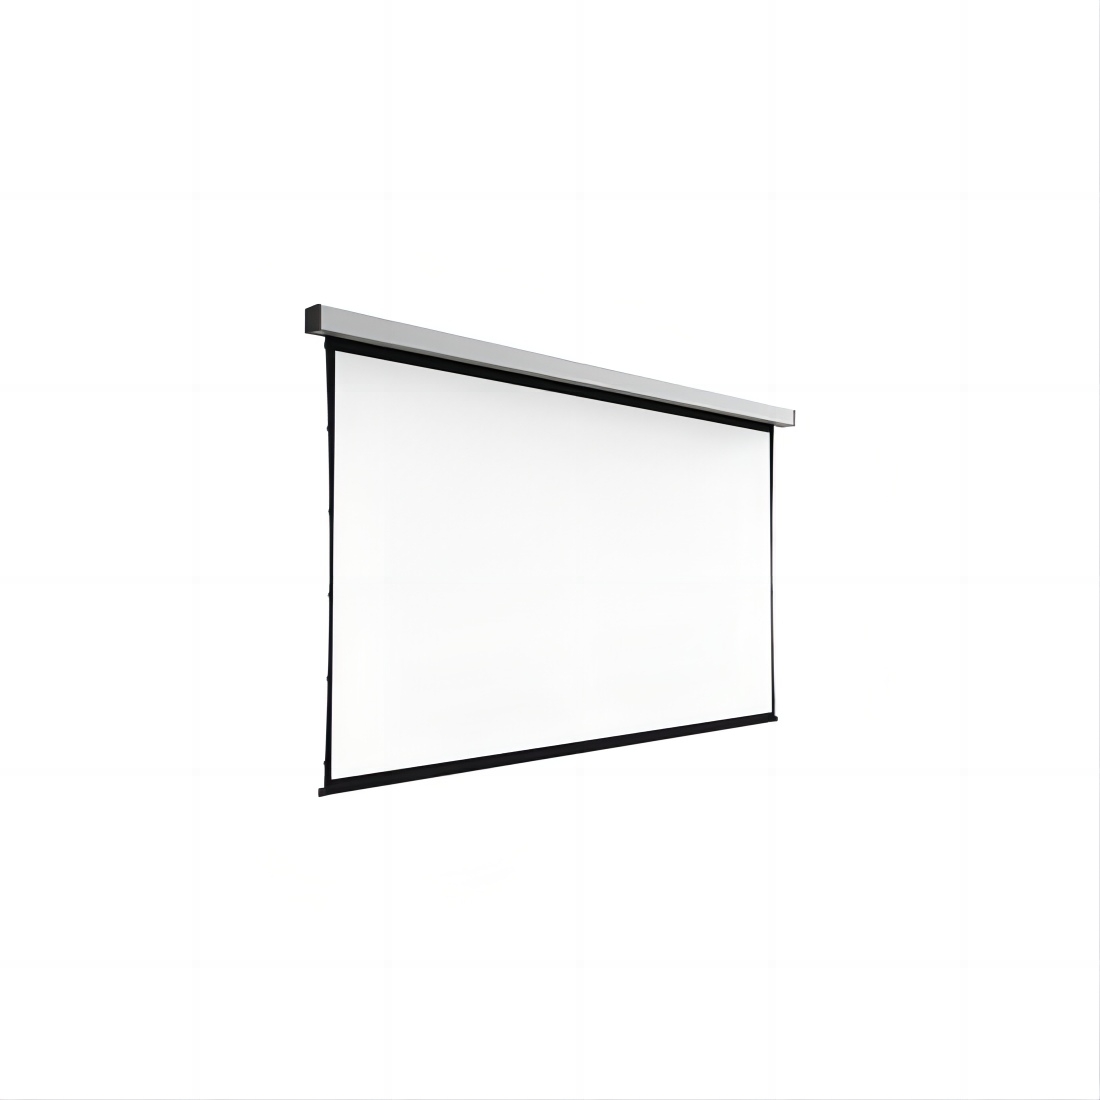 Screen Innovations Solo 2 Wall and Ceiling Tensioned Electric Projector Screen - 120" (64x102) - 16:10 - Pure White 1.3 - SOW120PW